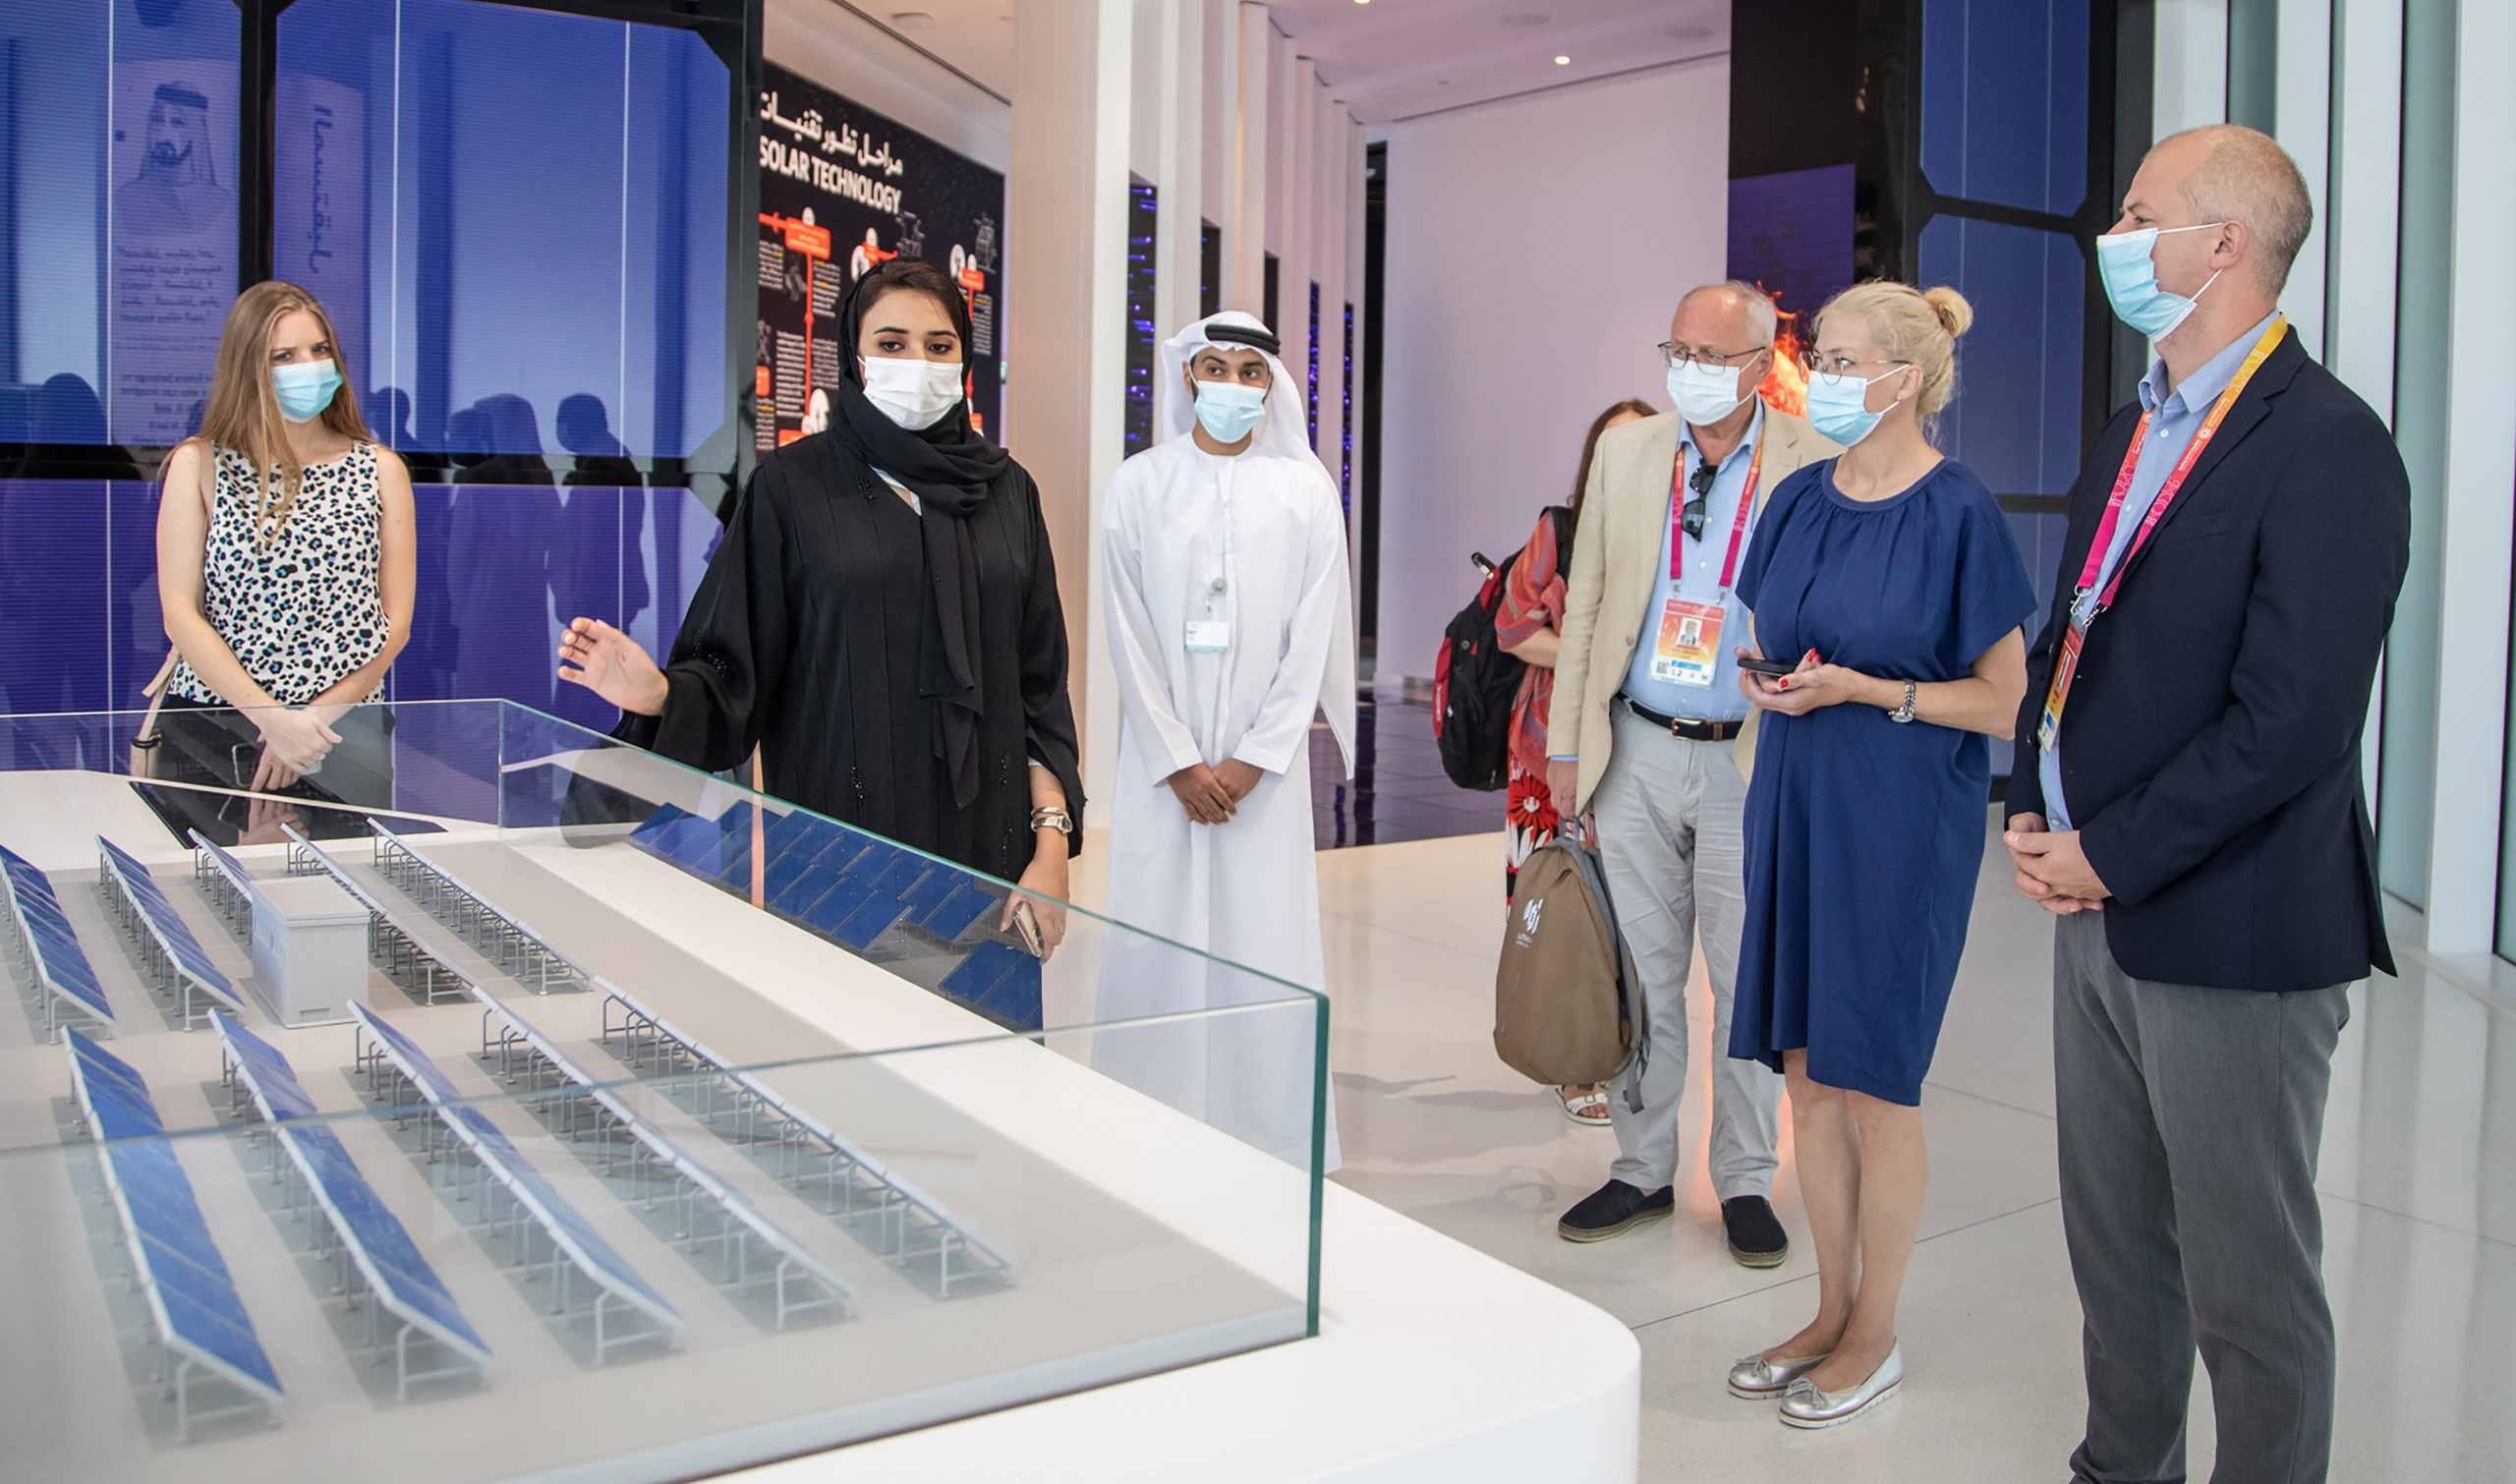 DEWA’s Innovation Centre welcomes several high-level delegations from around the world